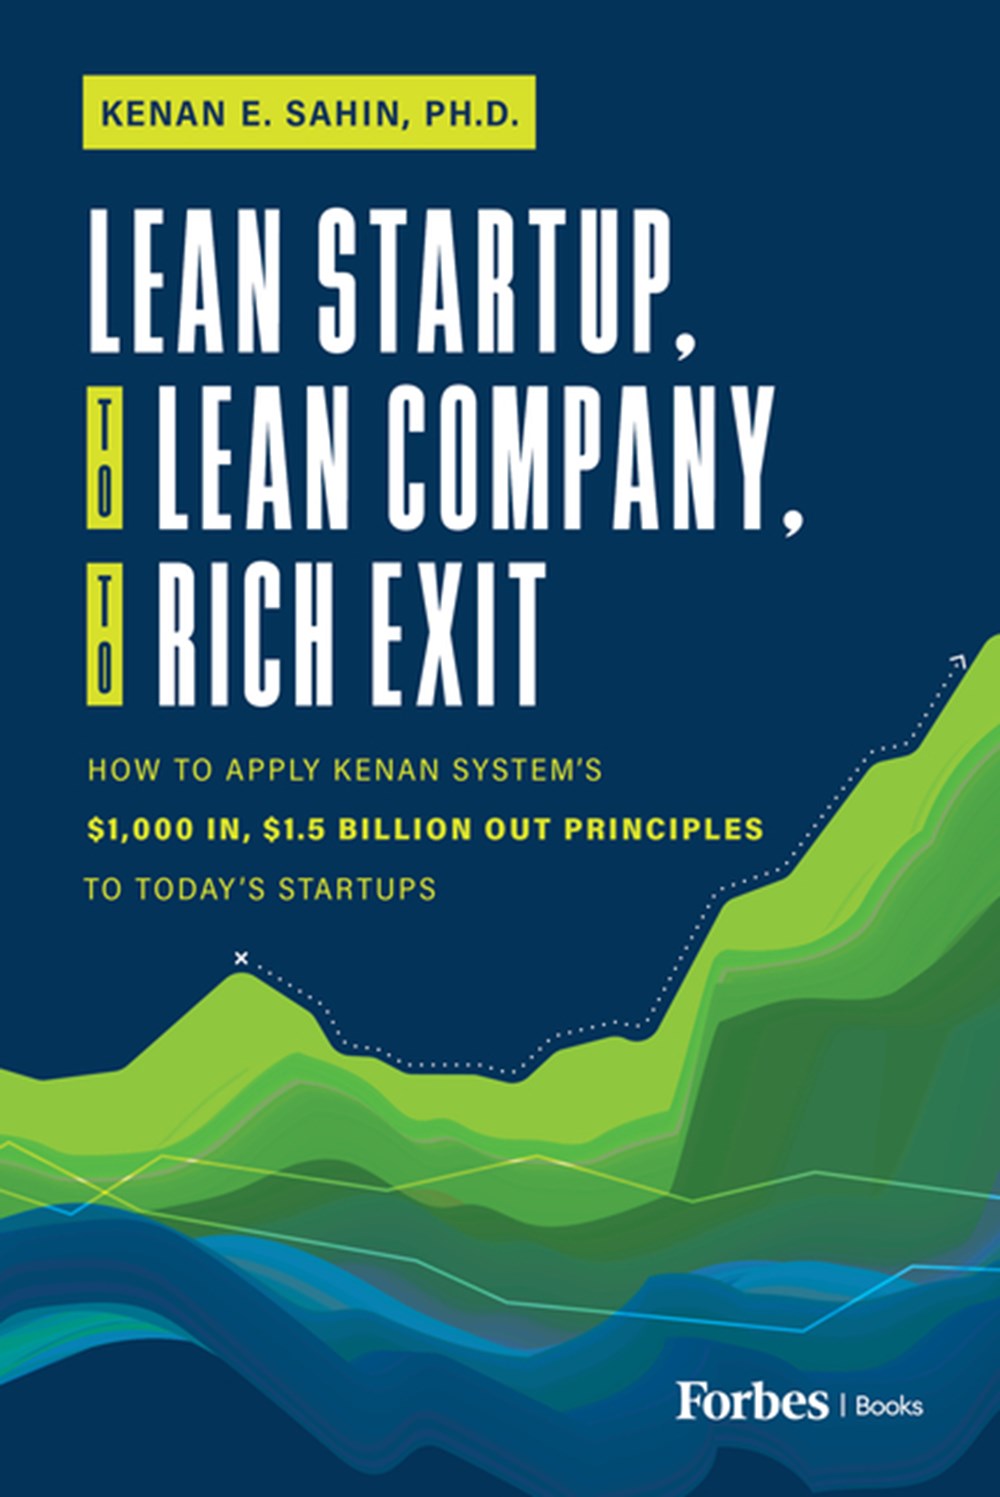 Lean Startup, to Lean Company, to Rich Exit: How to Apply Kenan System's $1000 In, $1.5 Billion Out 